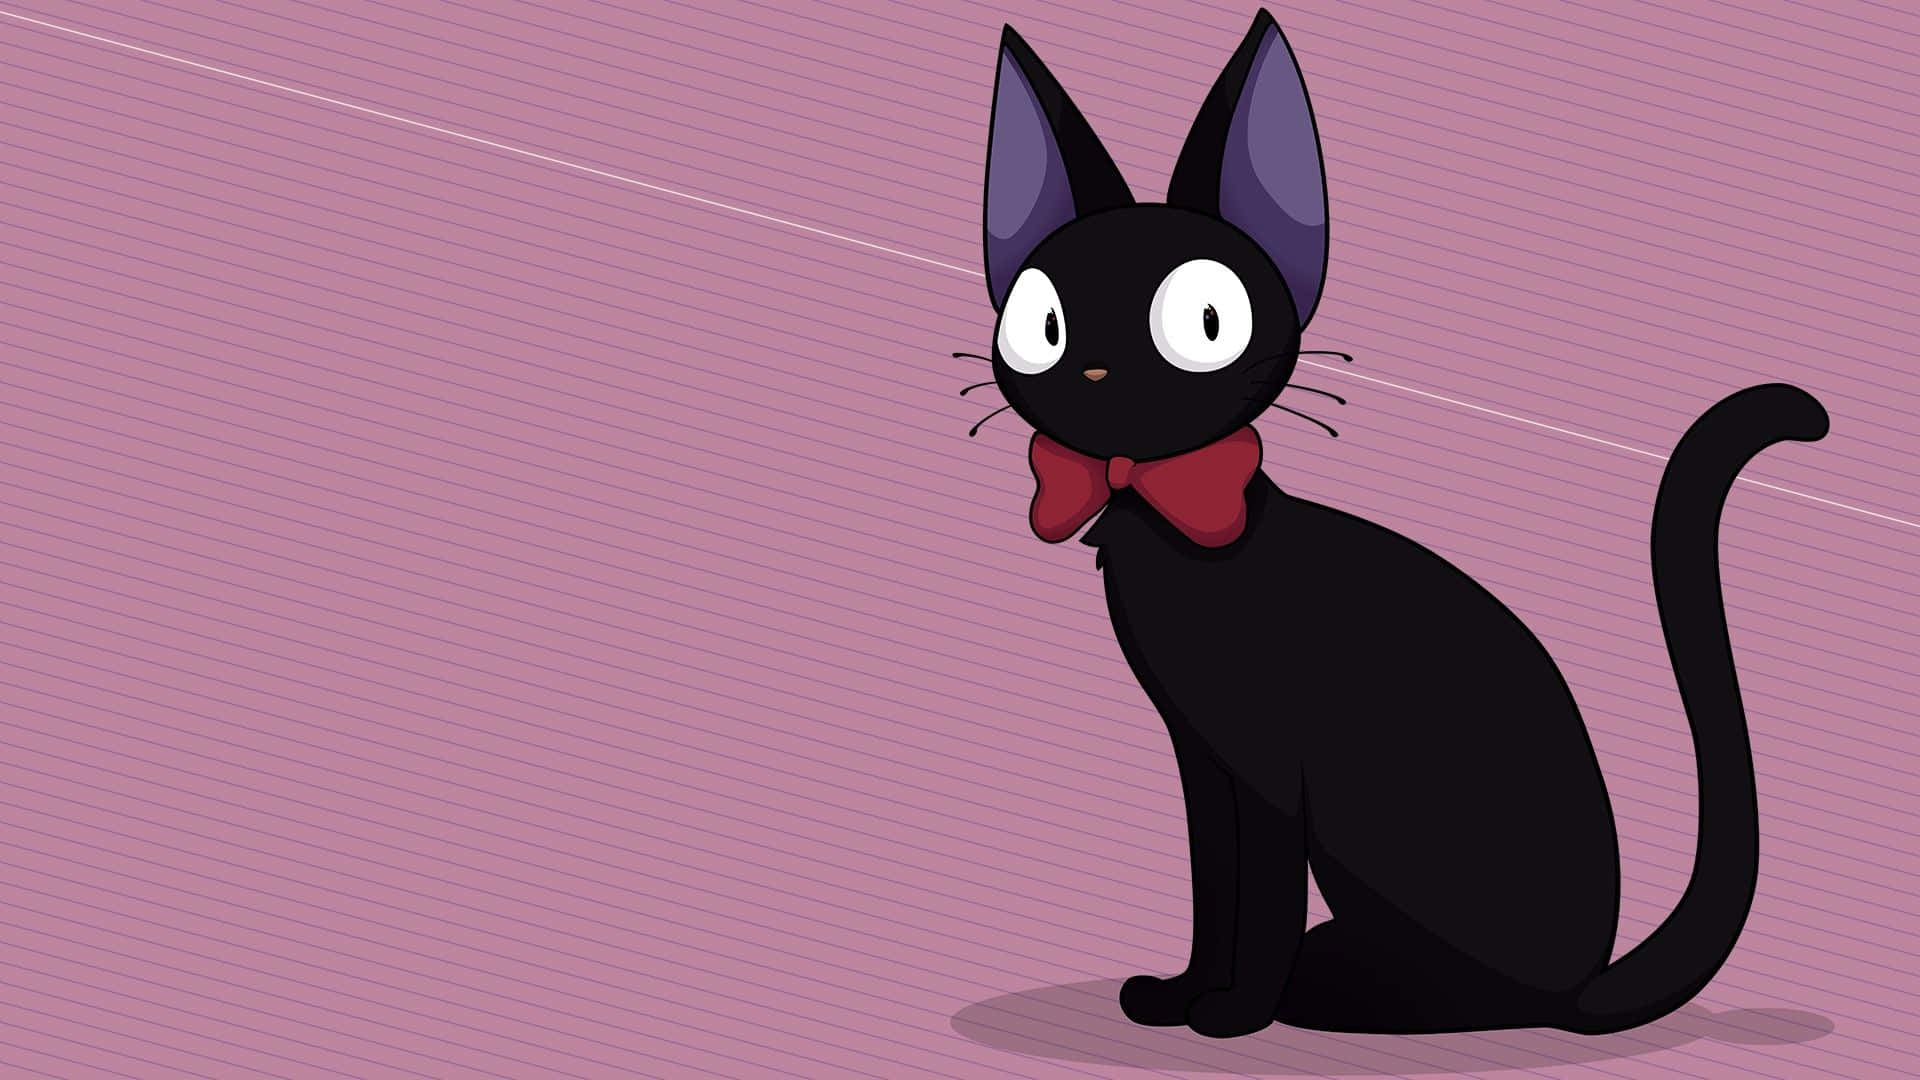 Jiji the Cat Perched on a Broomstick Wallpaper